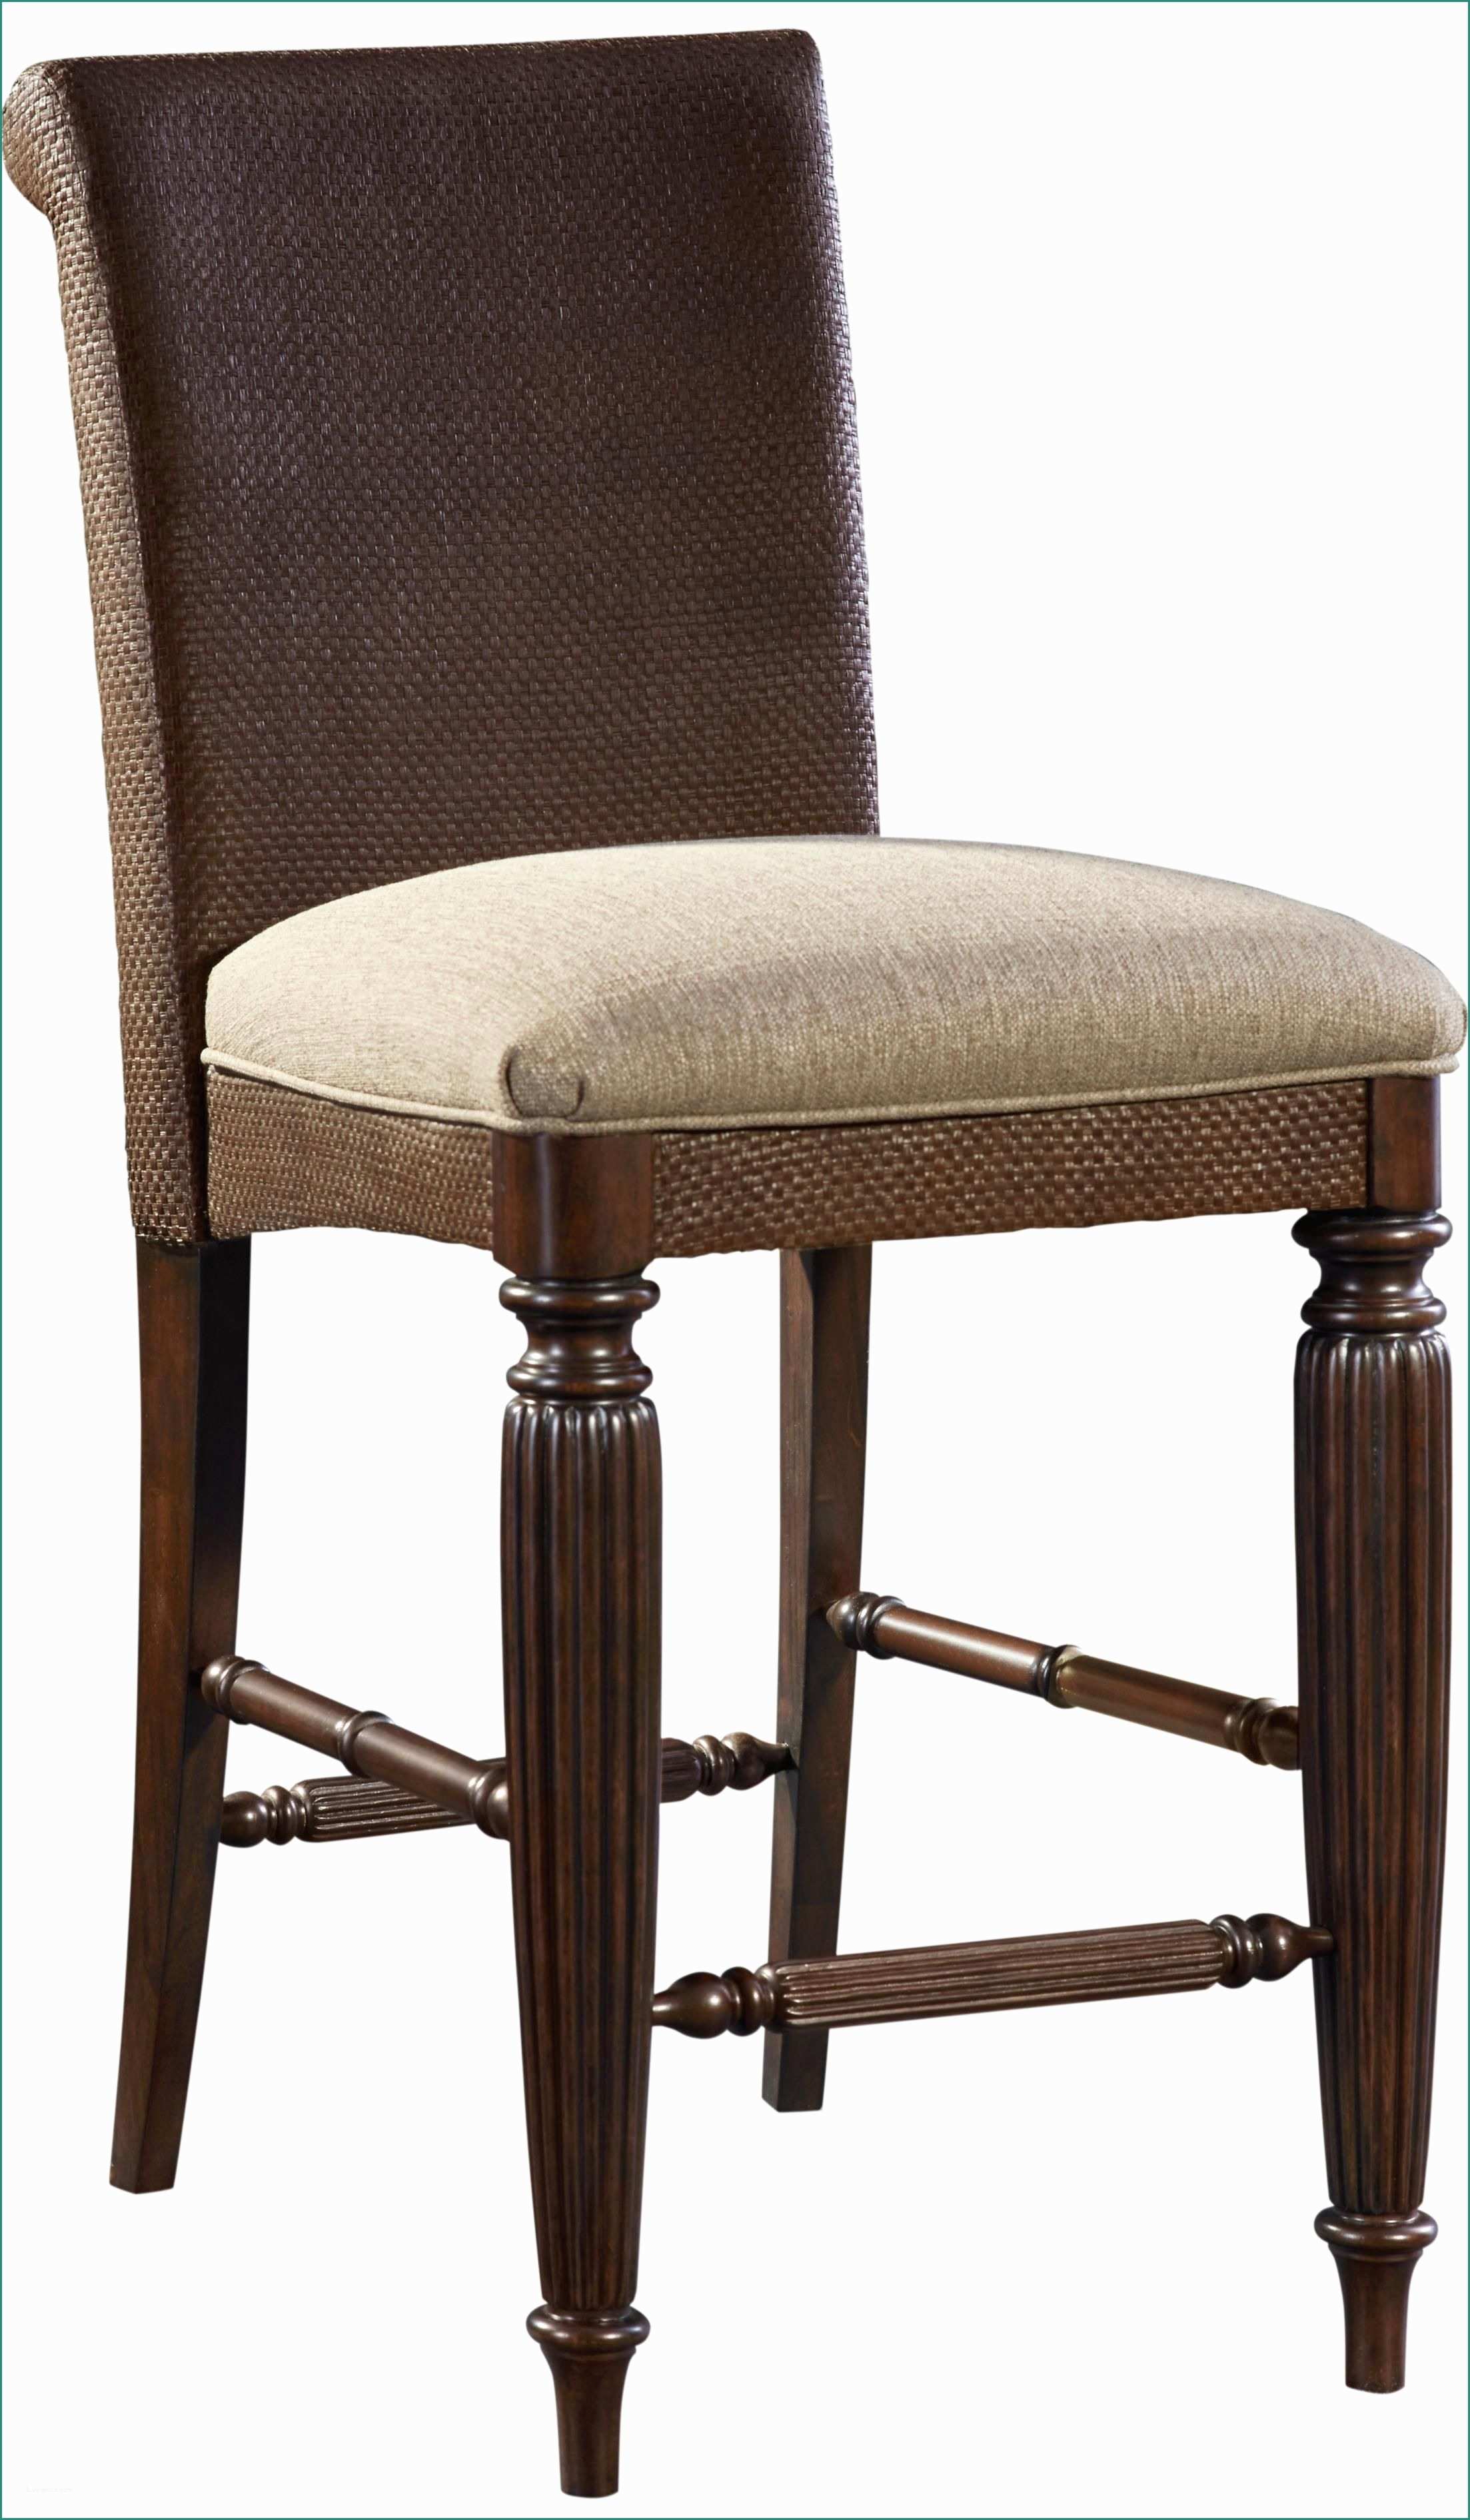 Sgabelli Stile Industriale E Jessa Woven Upholstered Seat Counter Stool by Broyhill Furniture